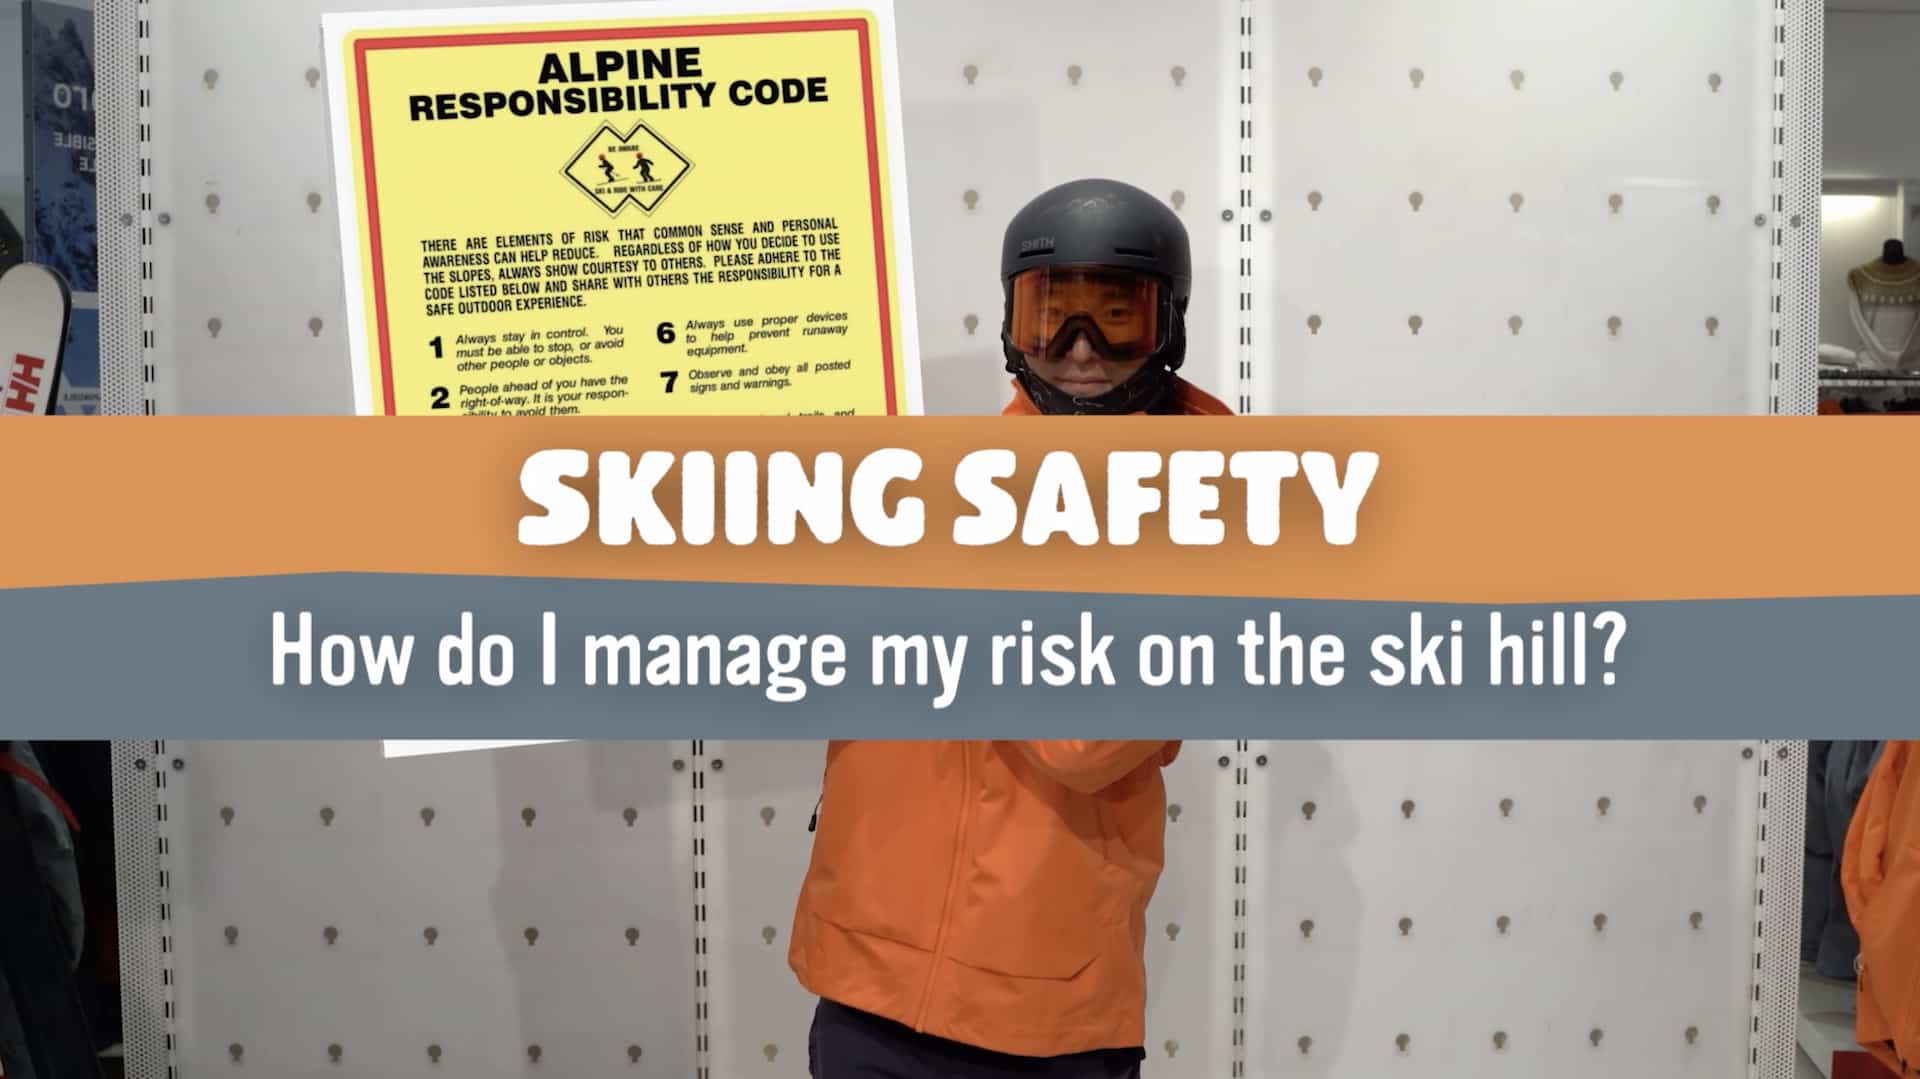 Featured Image for “First Timer Questions: How Do I Manage My Risk on the Ski Hill?”